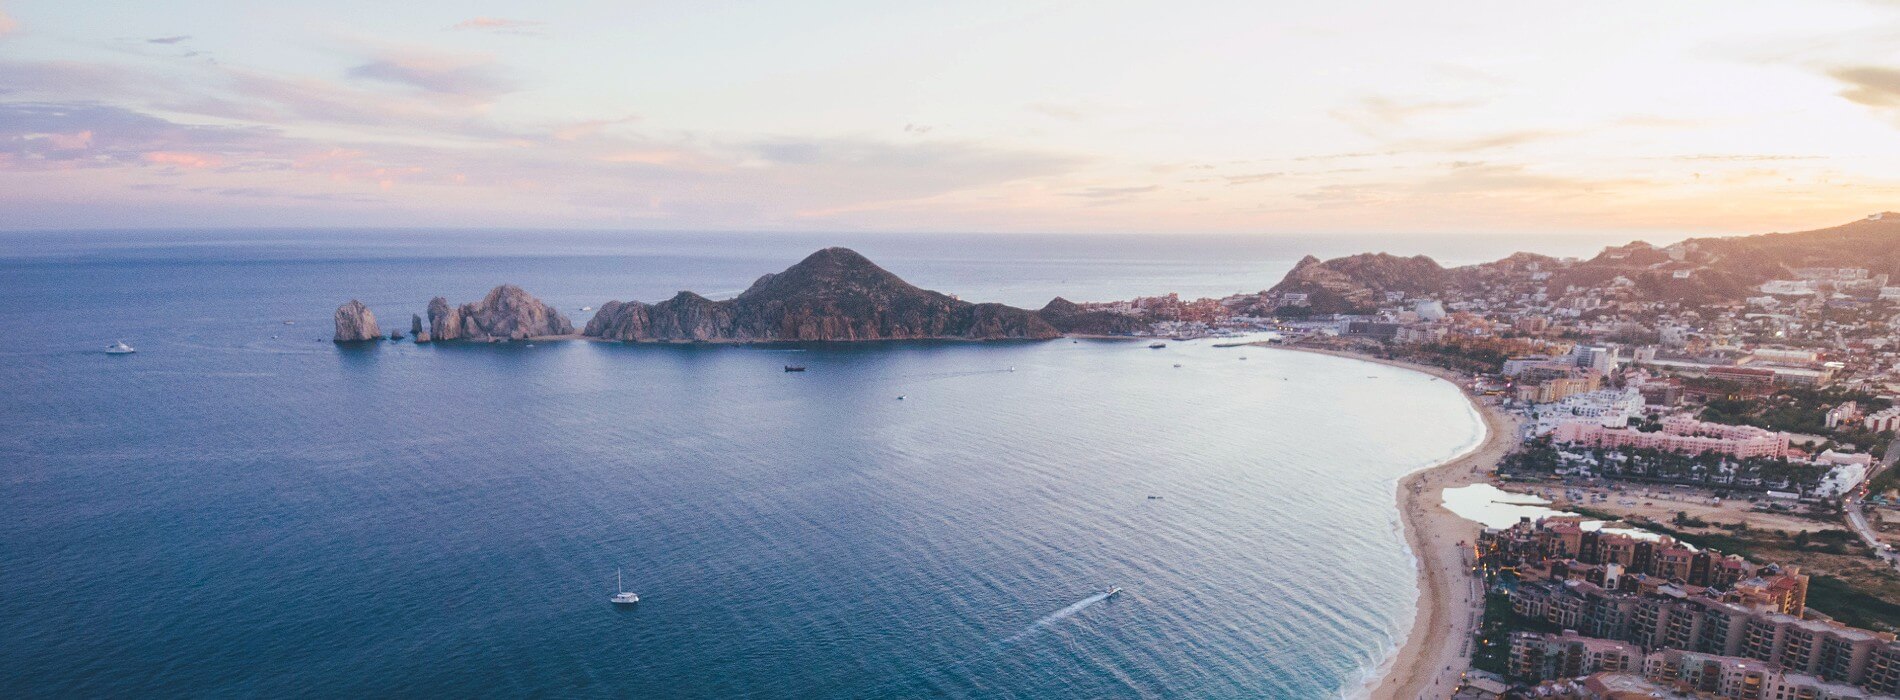 Complete Guide to Activities and Attractions in Cabo, Mexico